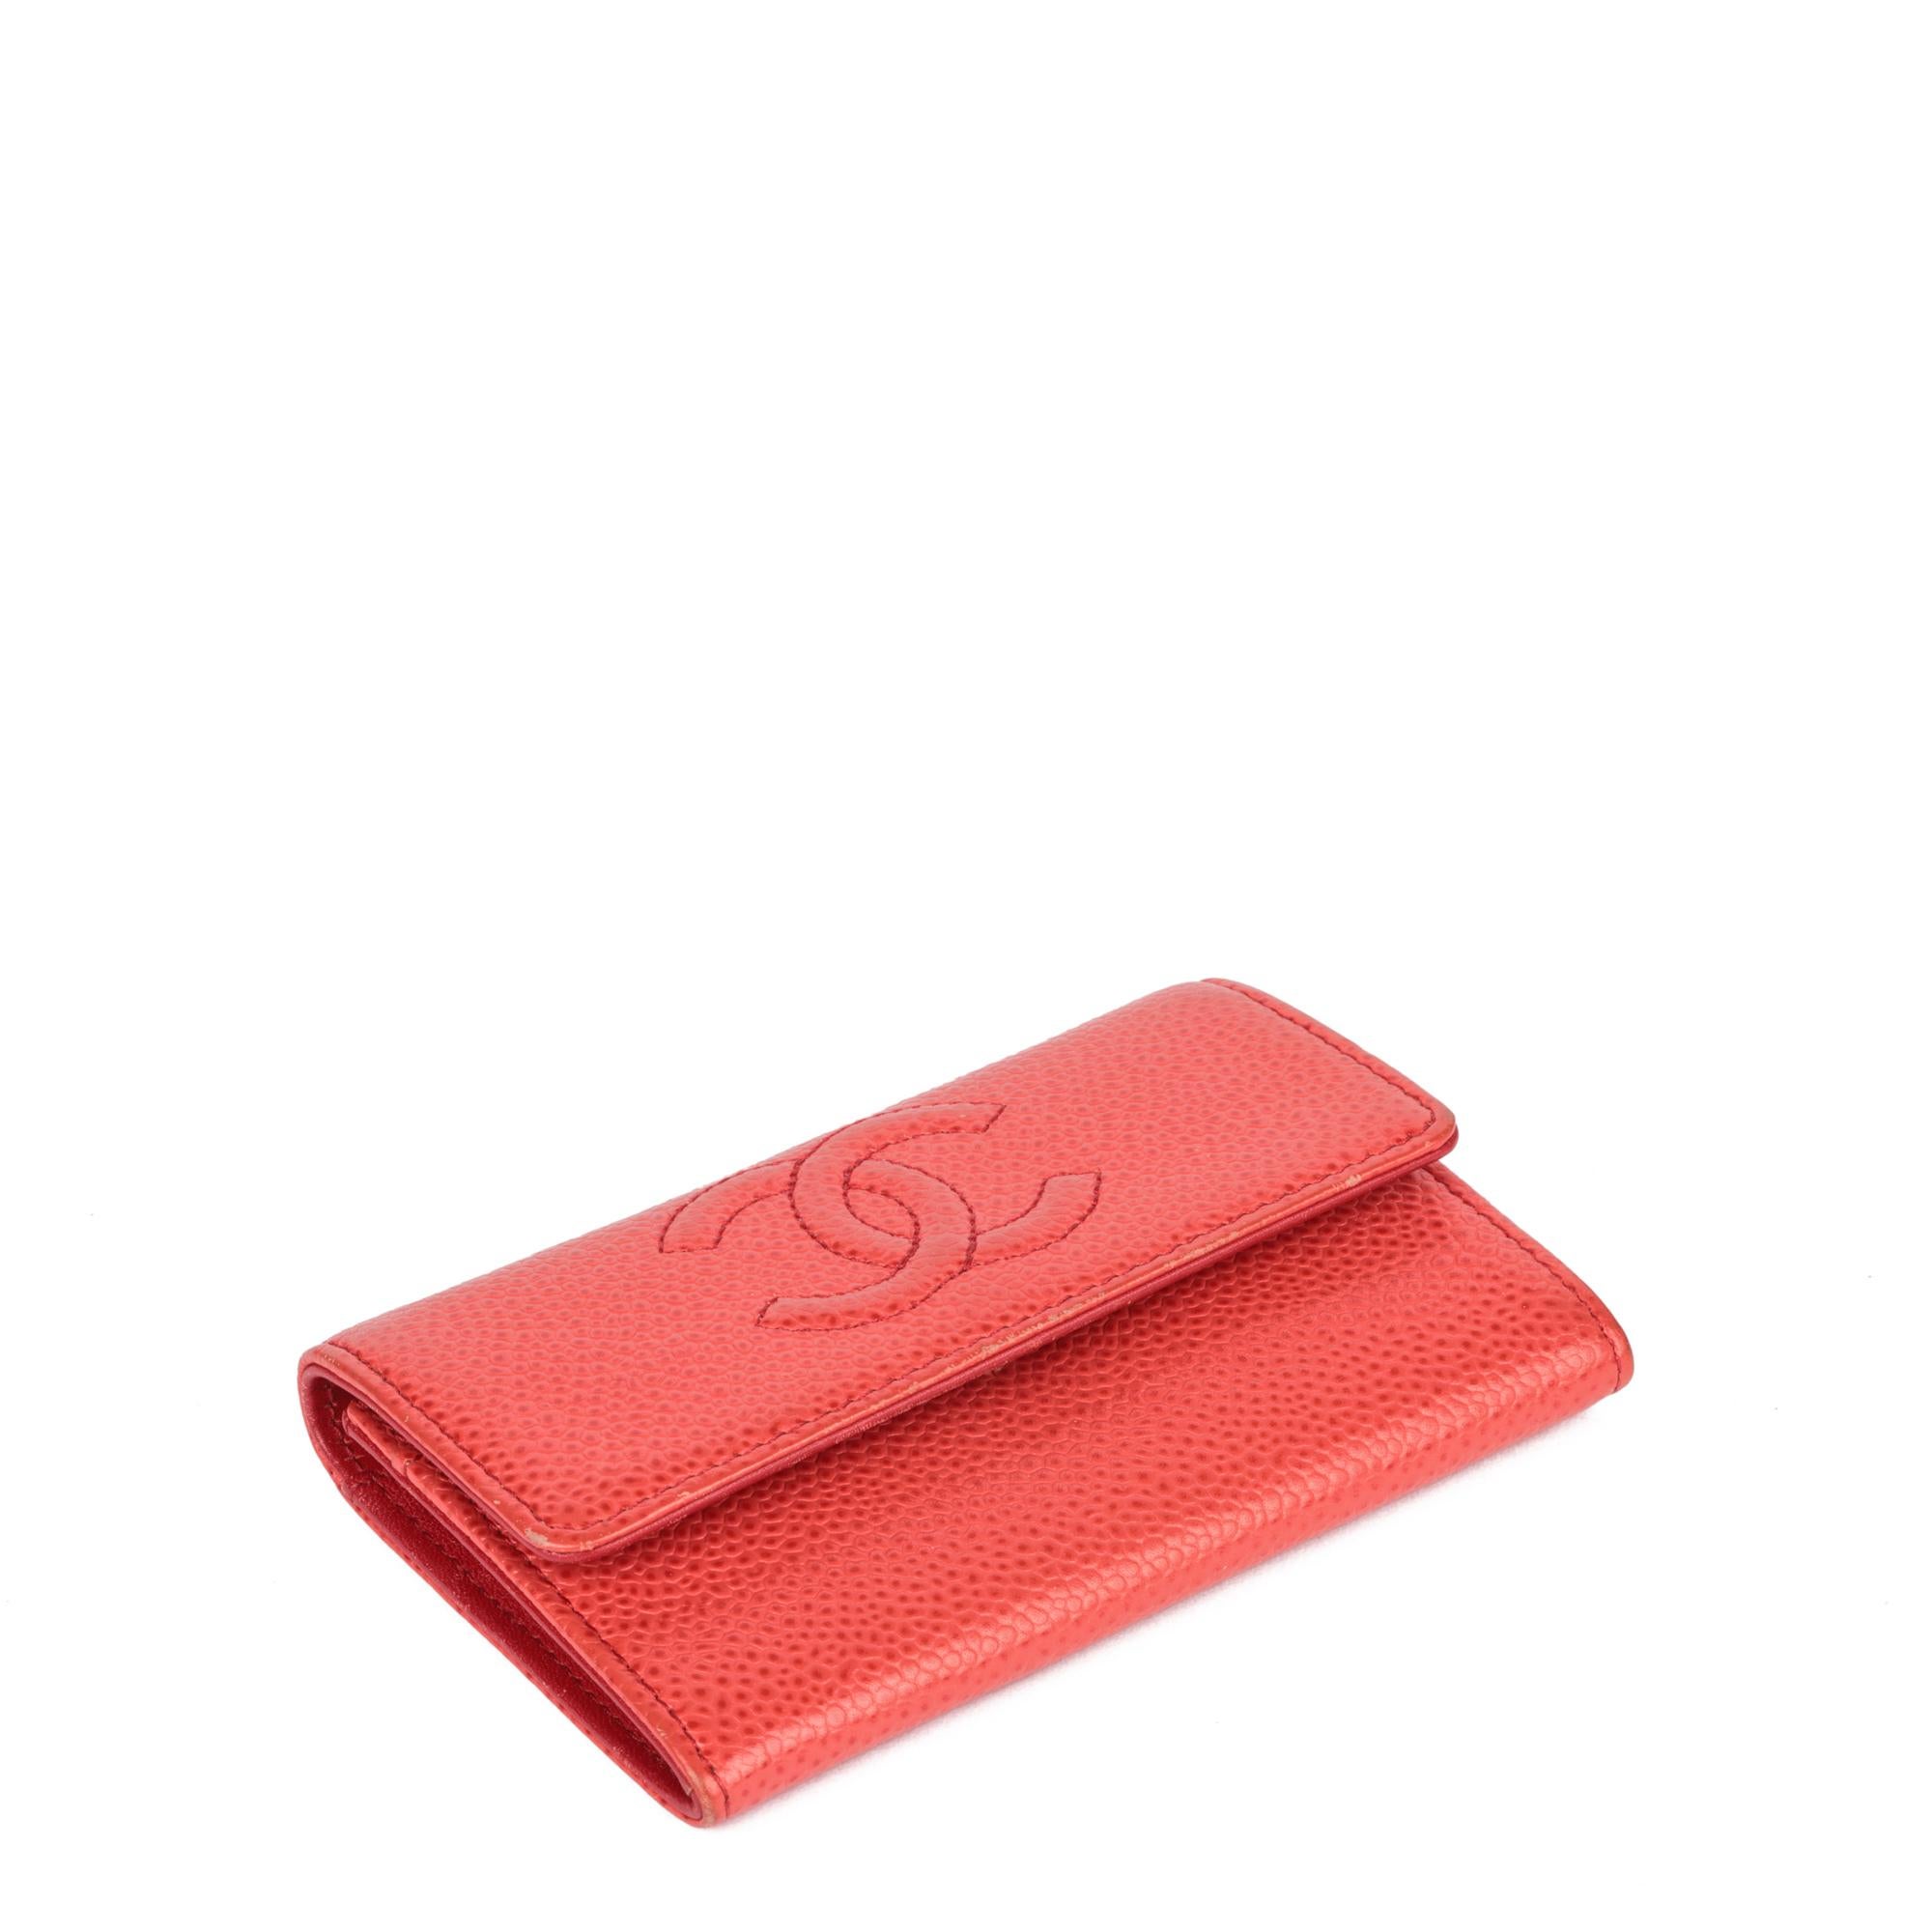 Chanel Red Caviar Leather Timeless Coin Purse In Good Condition For Sale In Bishop's Stortford, Hertfordshire